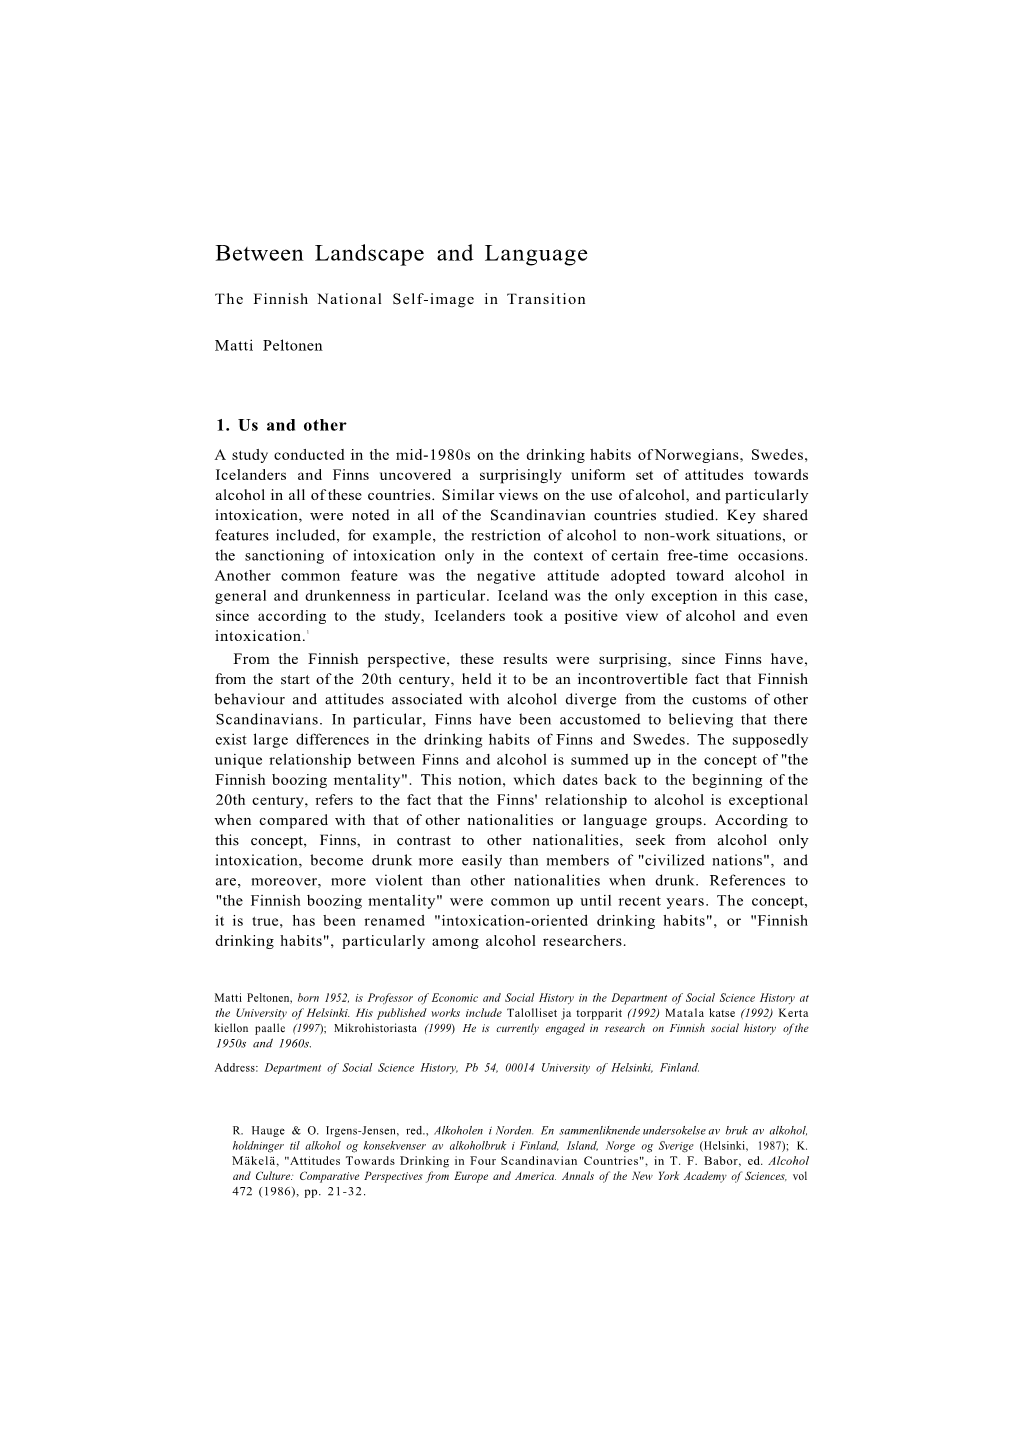 Between Landscape and Language: the Finnish National Self-Image In